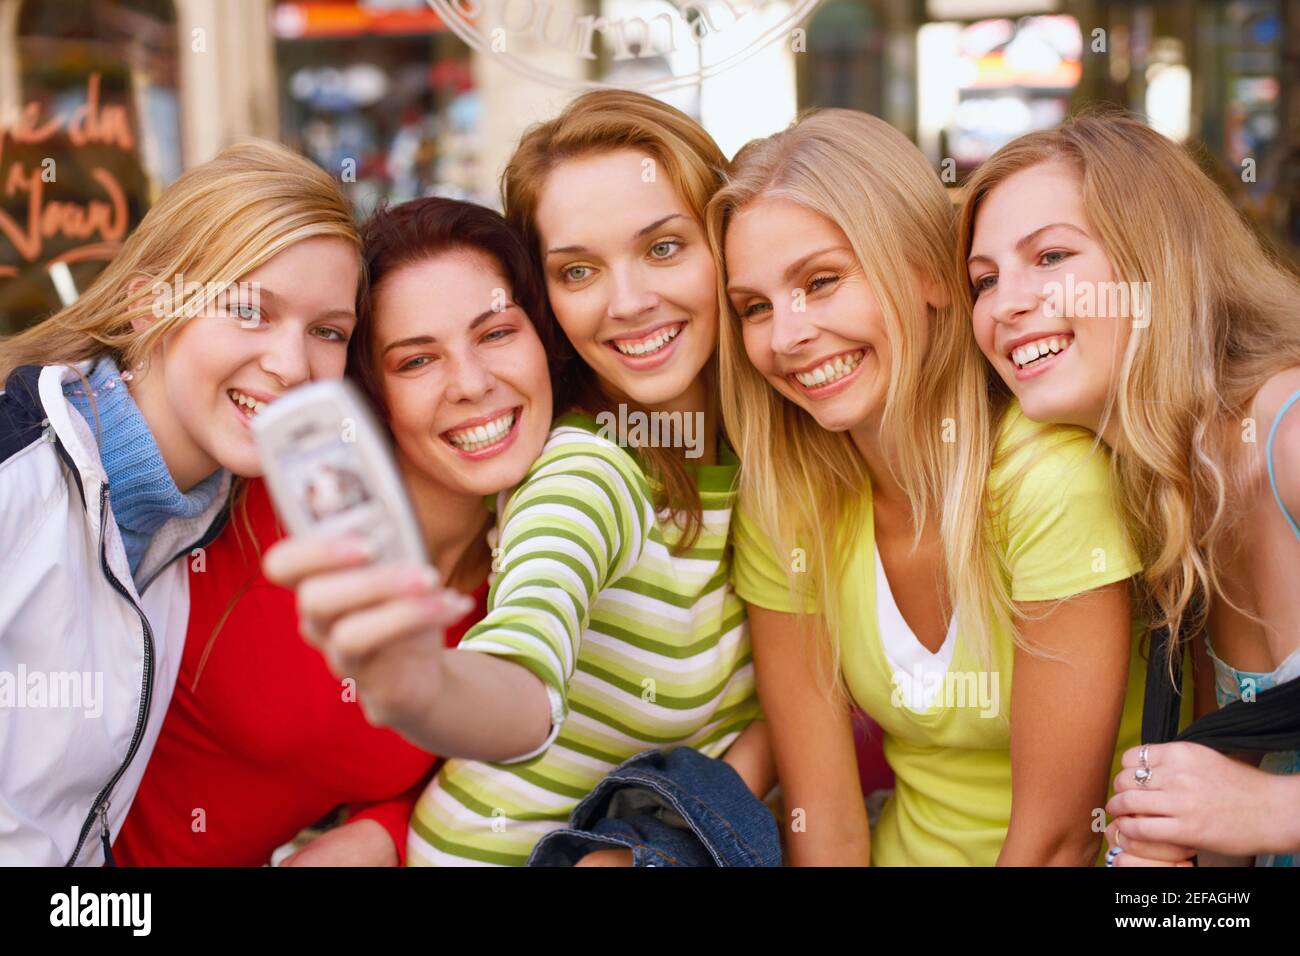 Five young women taking a photograph of themselves Stock Photo